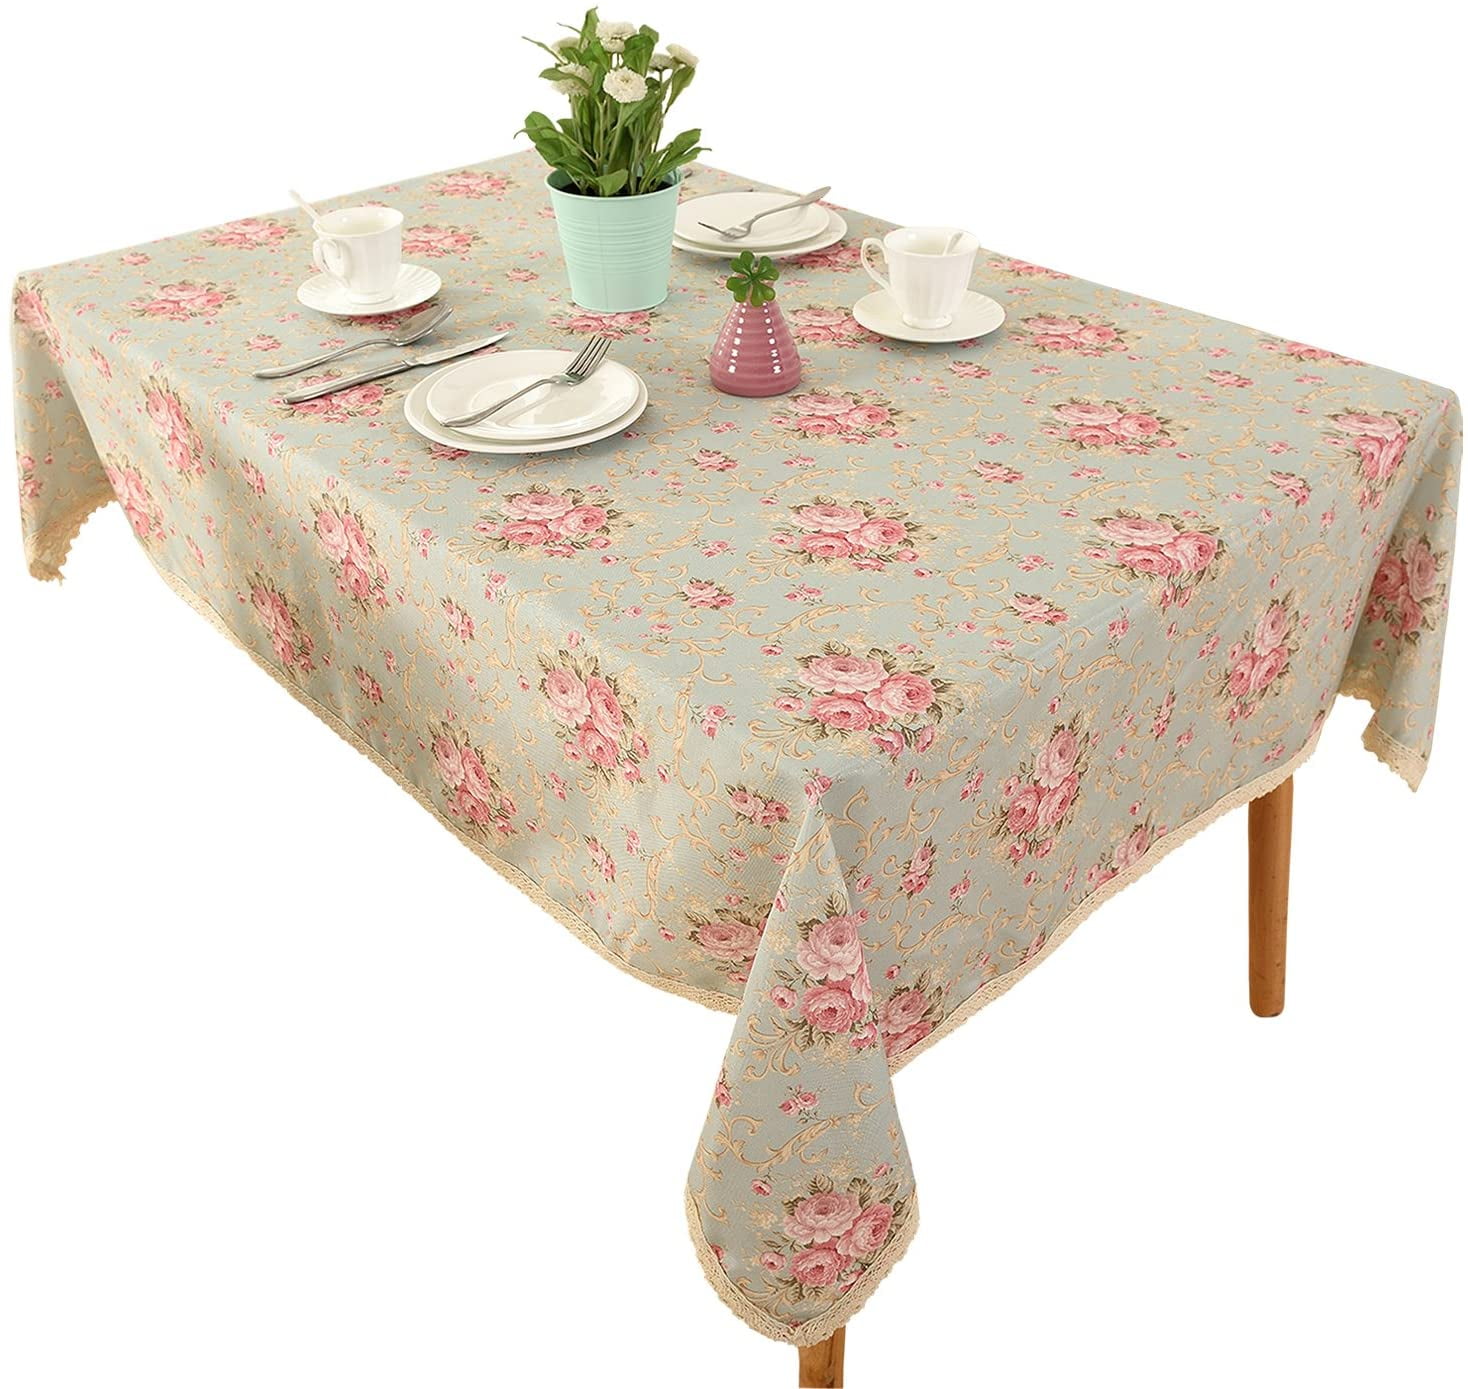 Dining Room Kitchen Rectangular Table Cover Multicolor Scandinavian Leaves and Flowers Pattern with Rainbow Colors Classic Floral Design Ambesonne Colorful Tablecloth 52 X 70